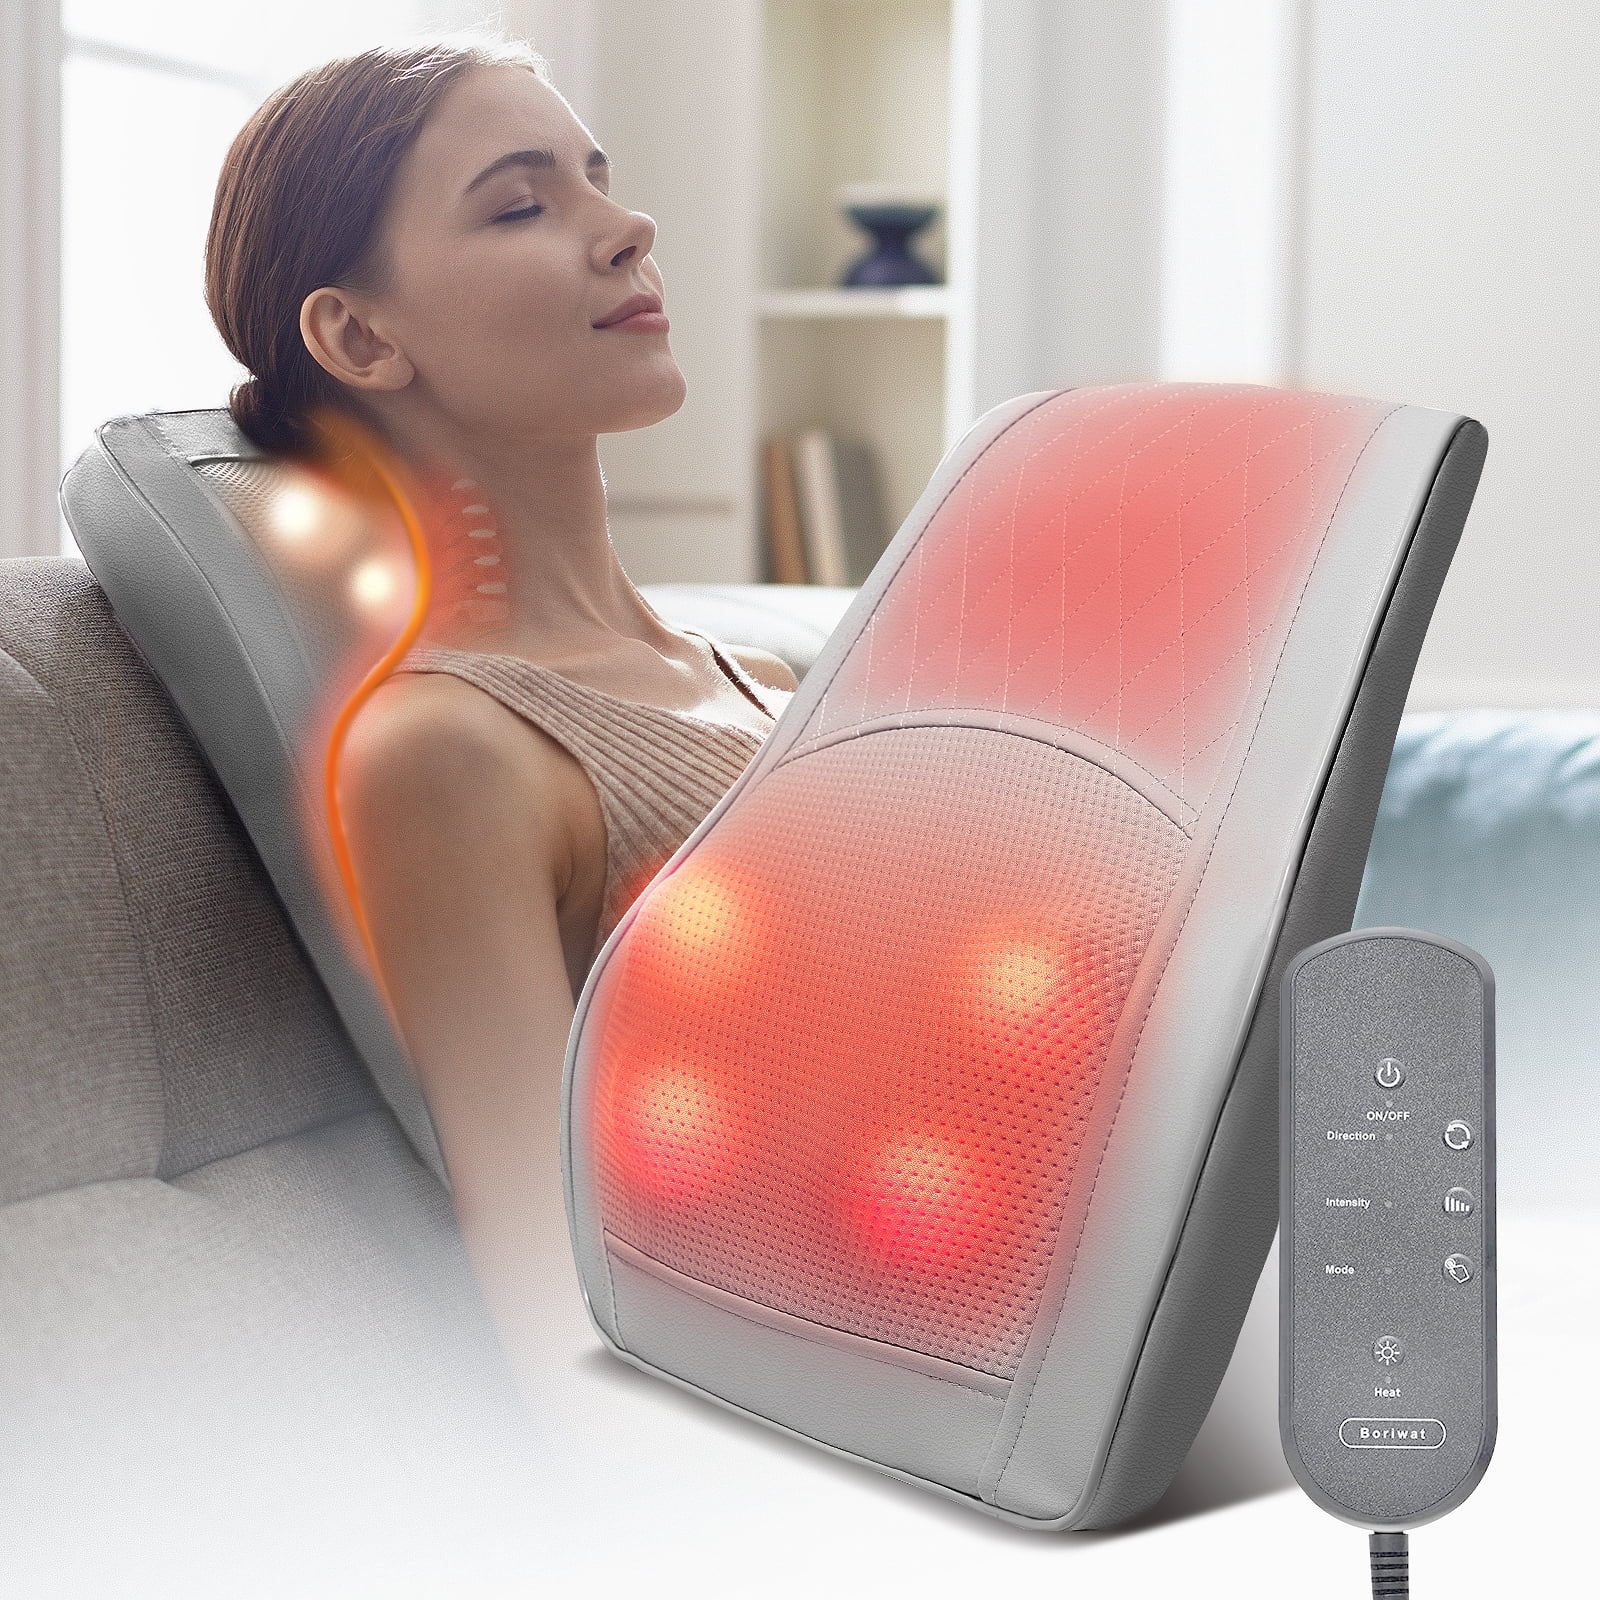 Boriwat Back Massager With Heat - Great Massager? 